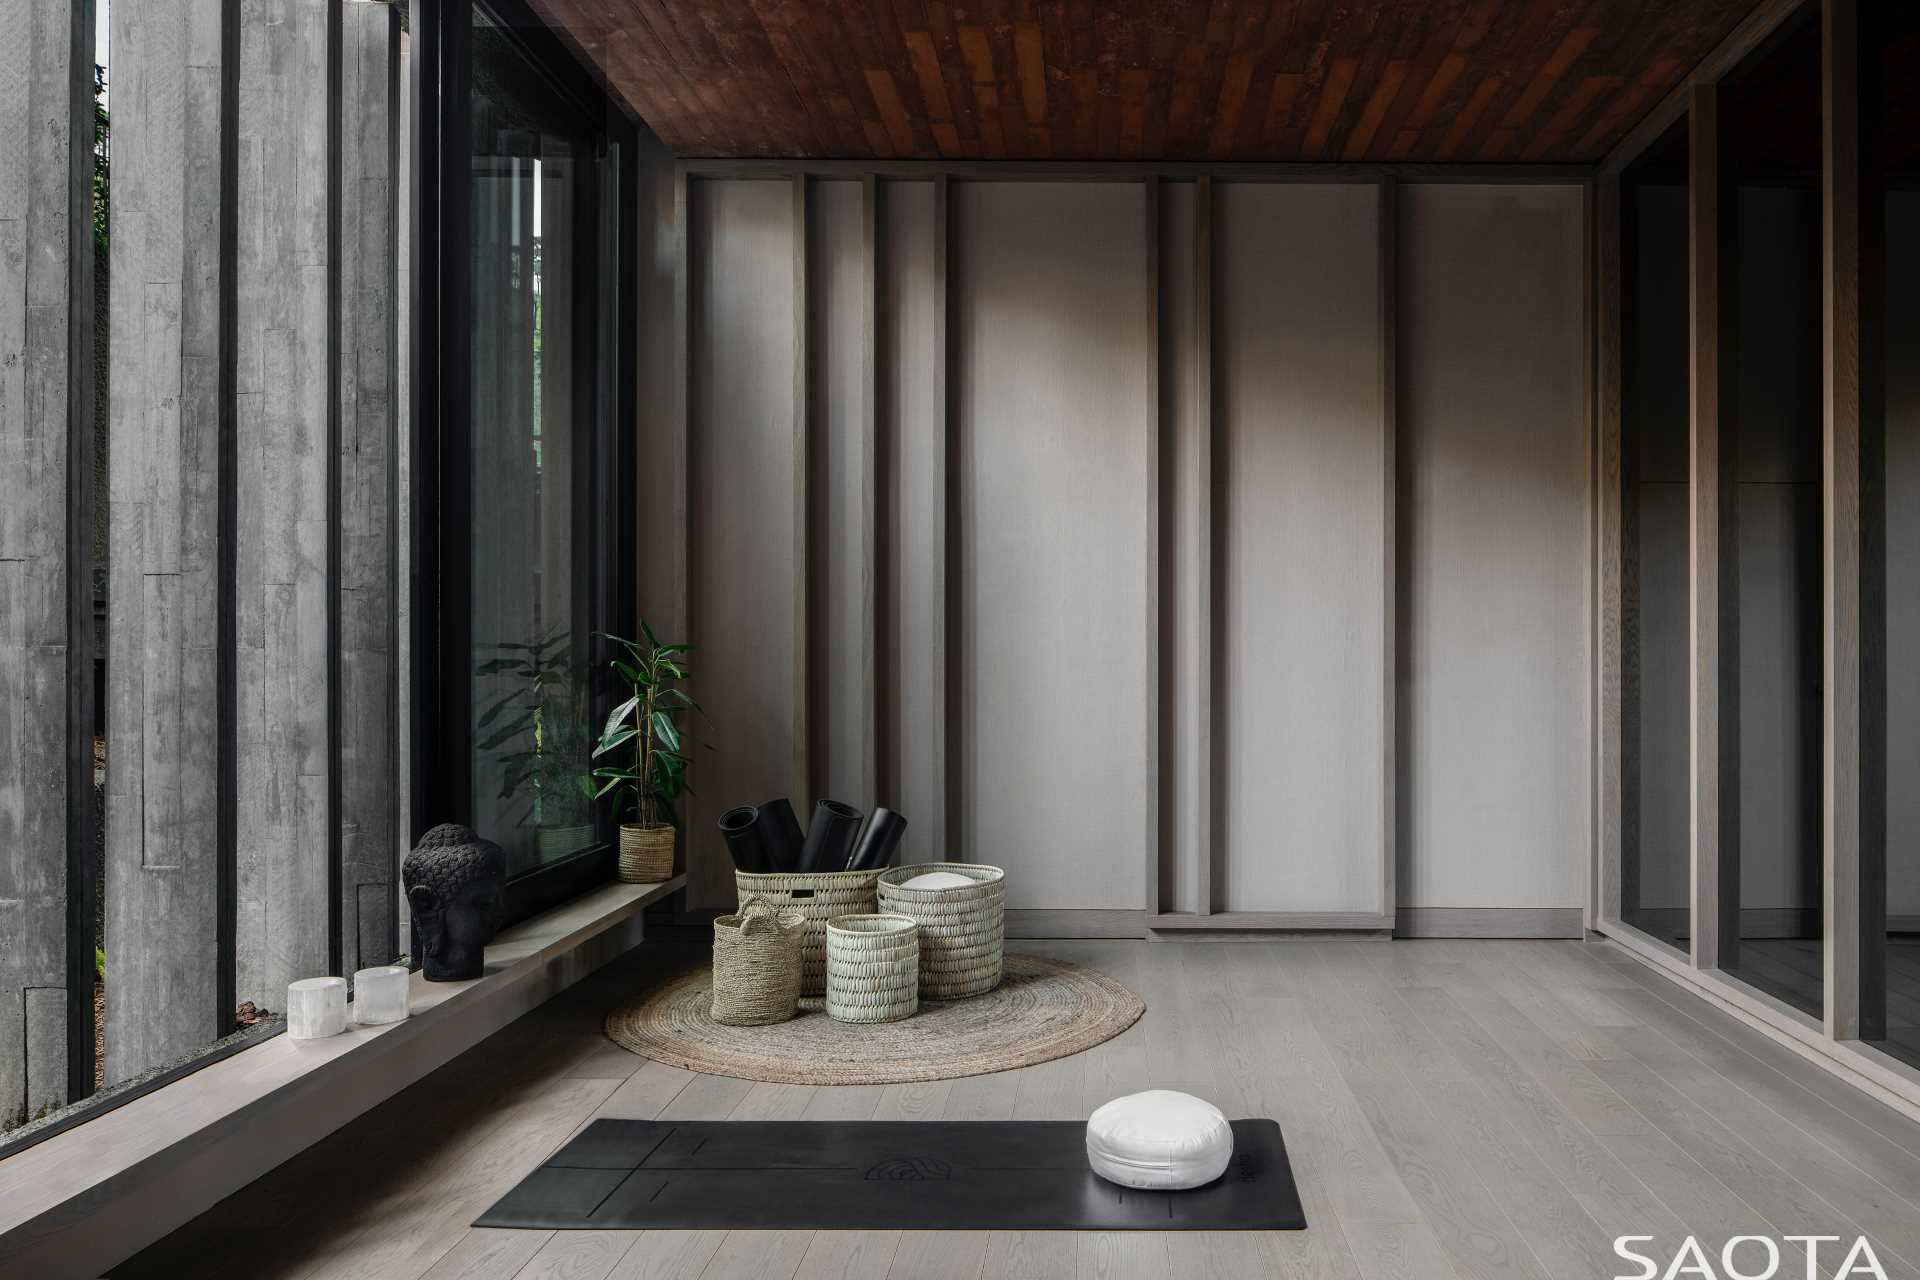 A yoga studio with a minimal design, allowing for a calm atmosphere.